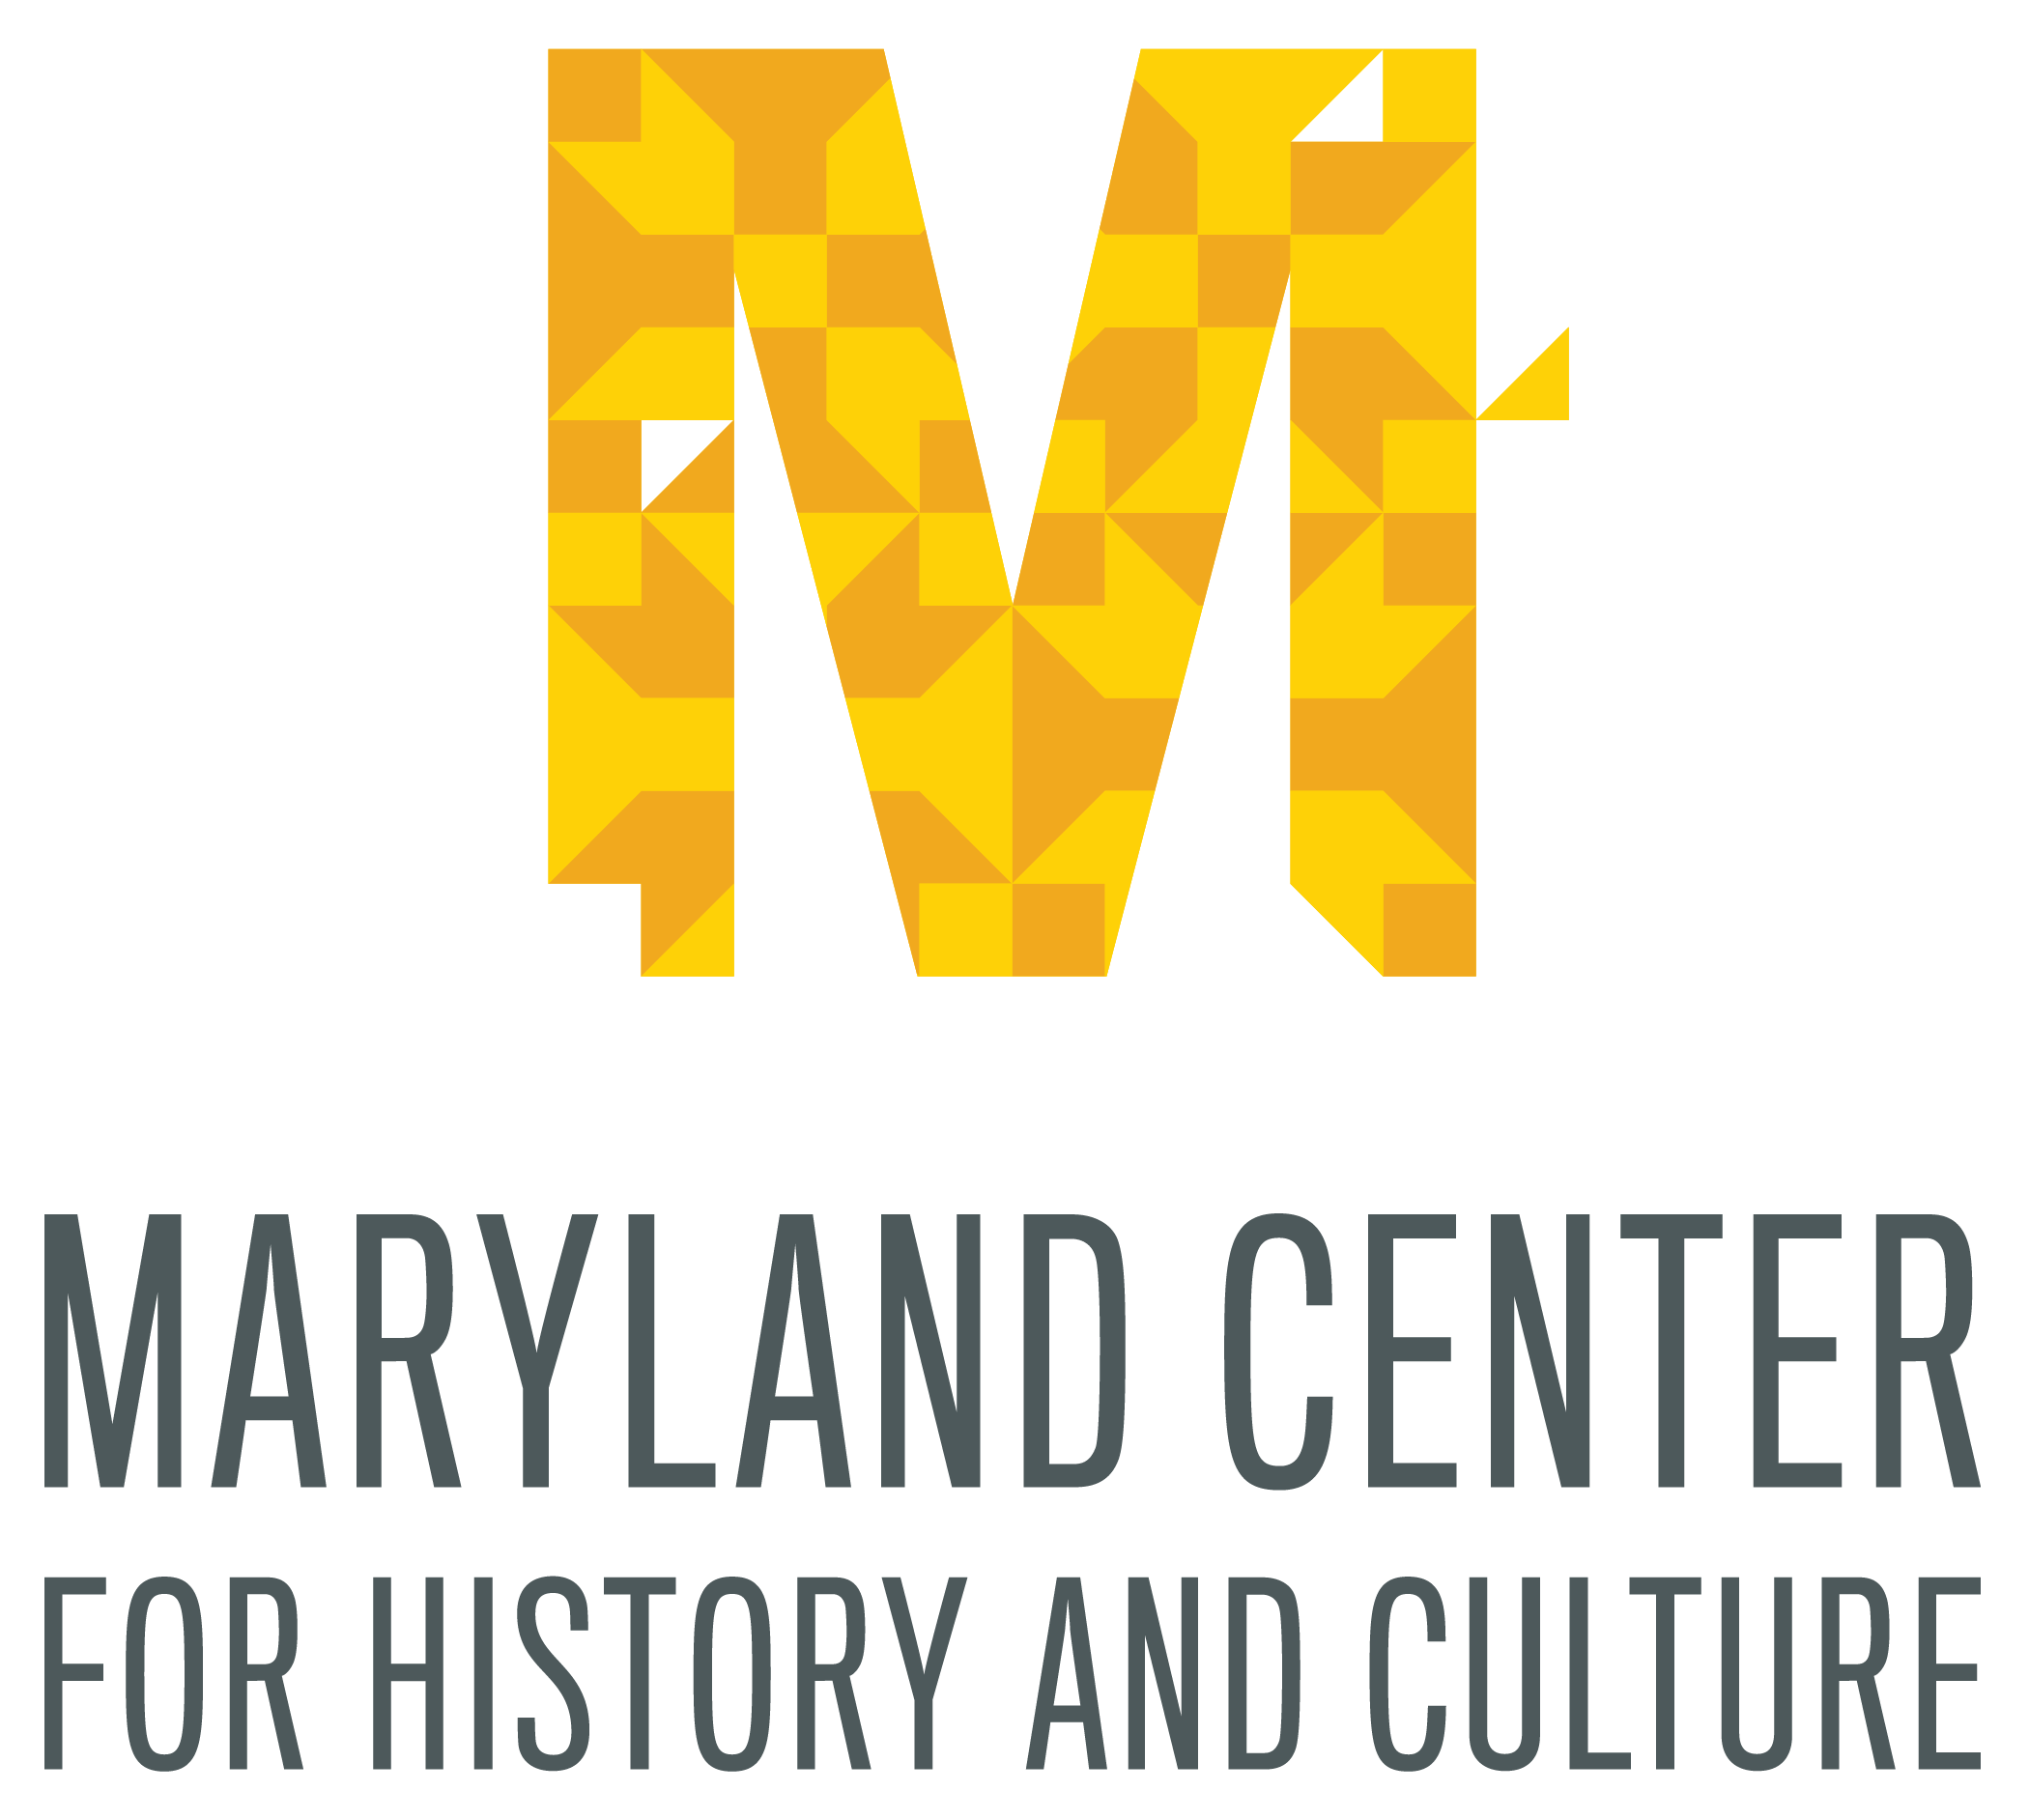 Maryland Center for History and Culture logo